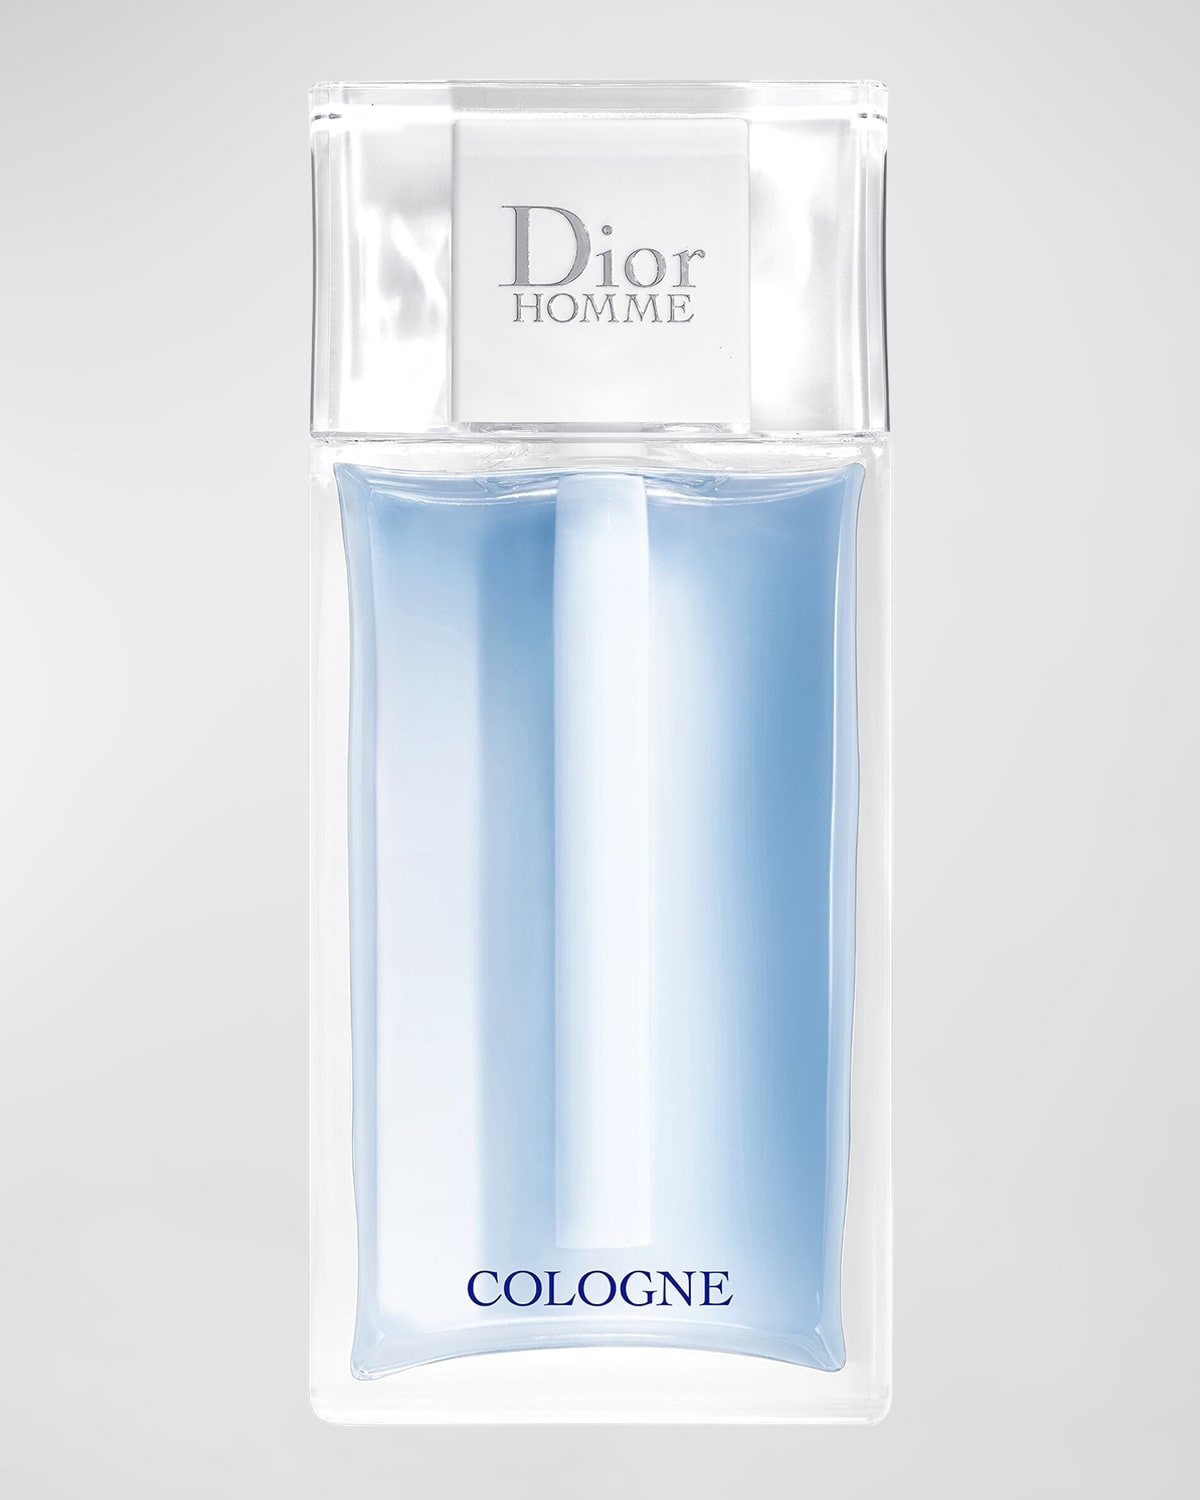 Dior Homme Cologne, 6.7 Oz. In White